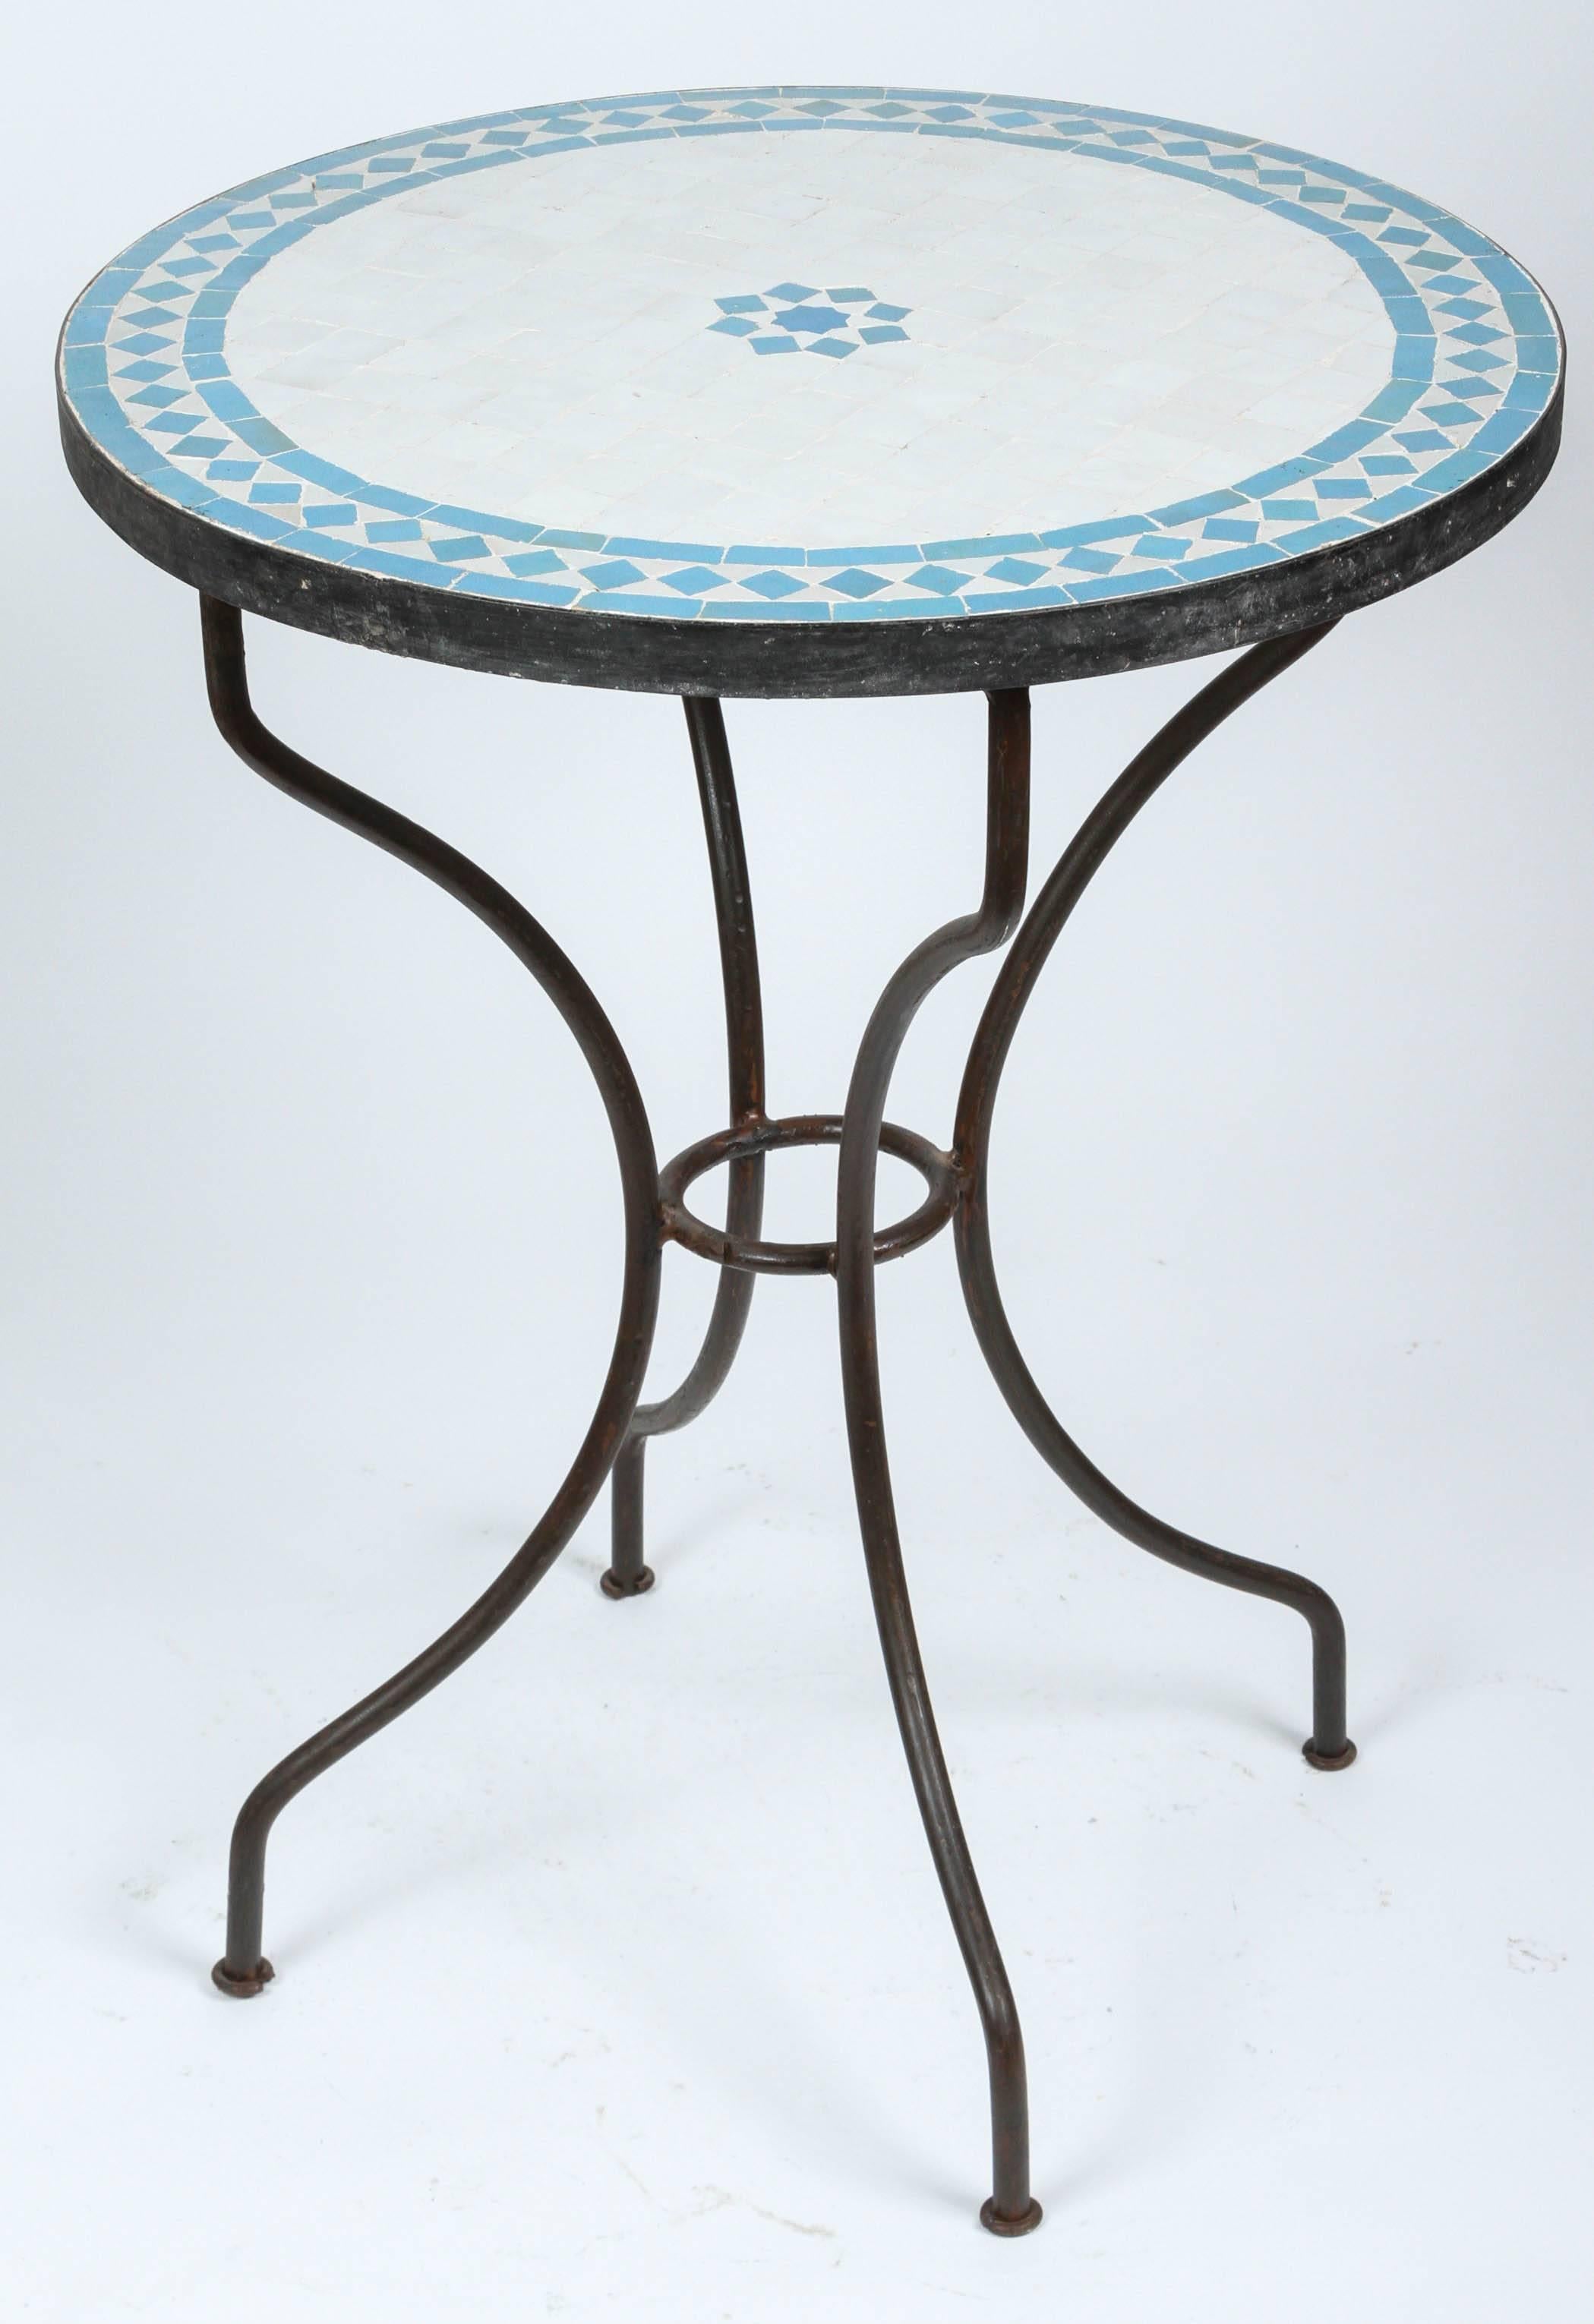 Hand-Crafted Moroccan Mosaic Turquoise Blue Tile Bistro Table Iron Base